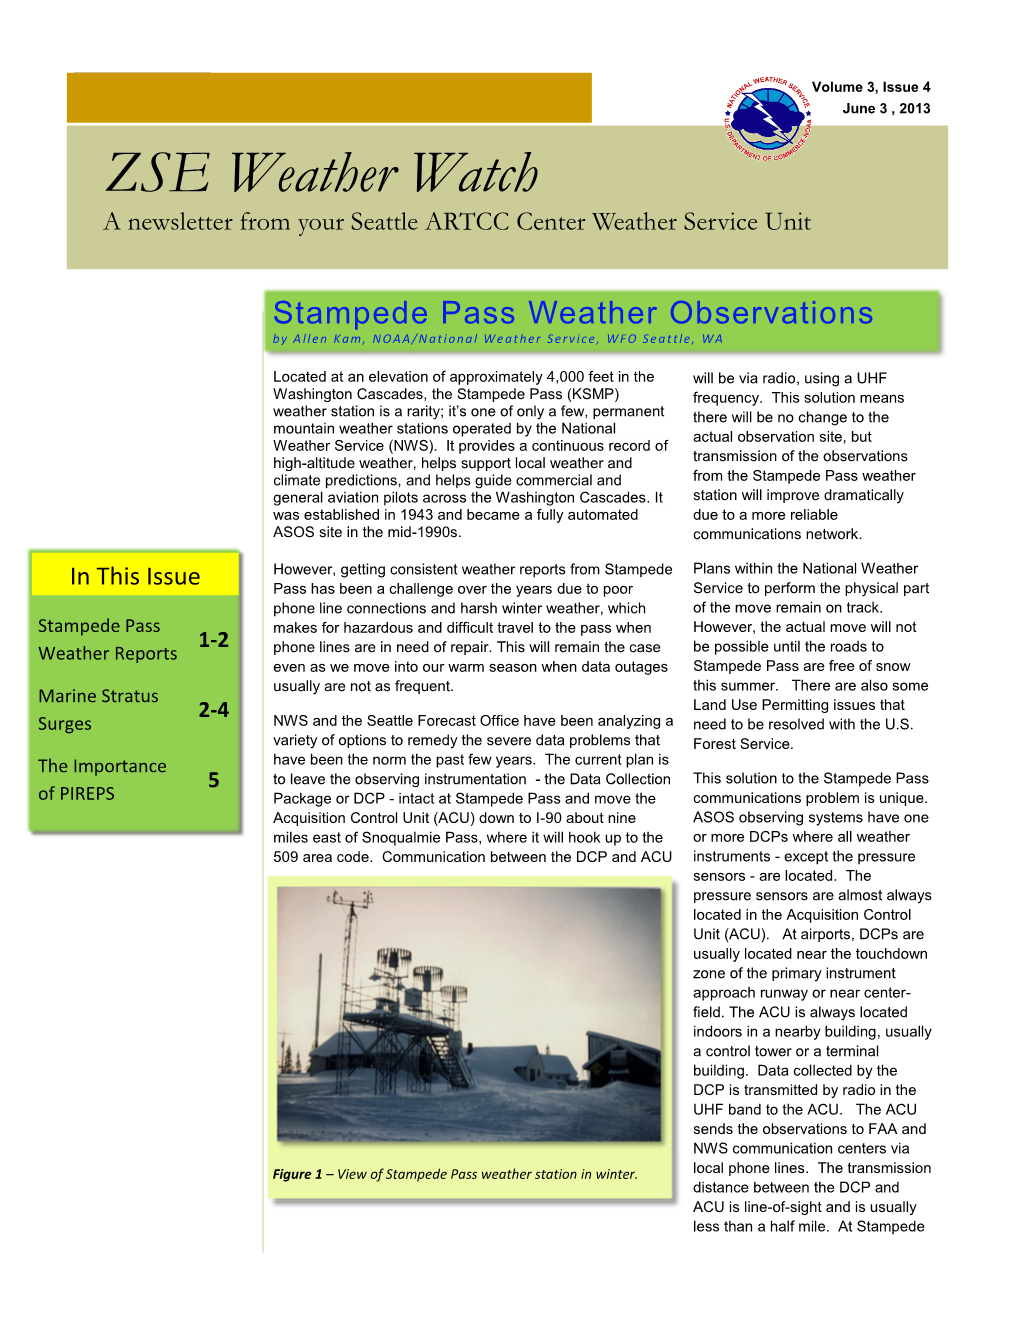 ZSE Weather Watch a Newsletter from Your Seattle ARTCC Center Weather Service Unit